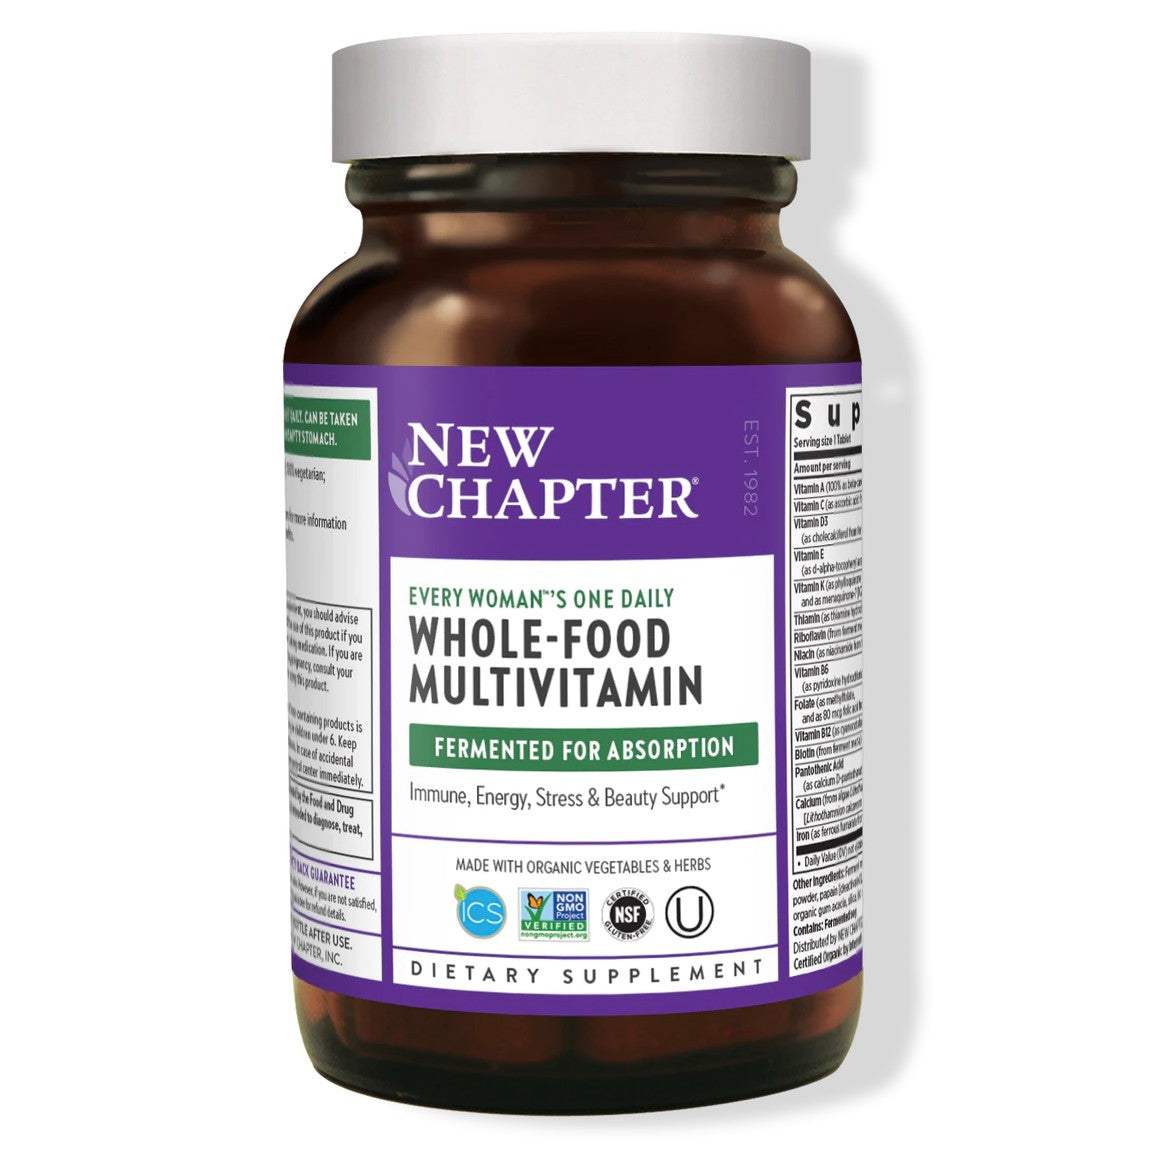 Every Woman's One Daily Multivitamin - My Village Green